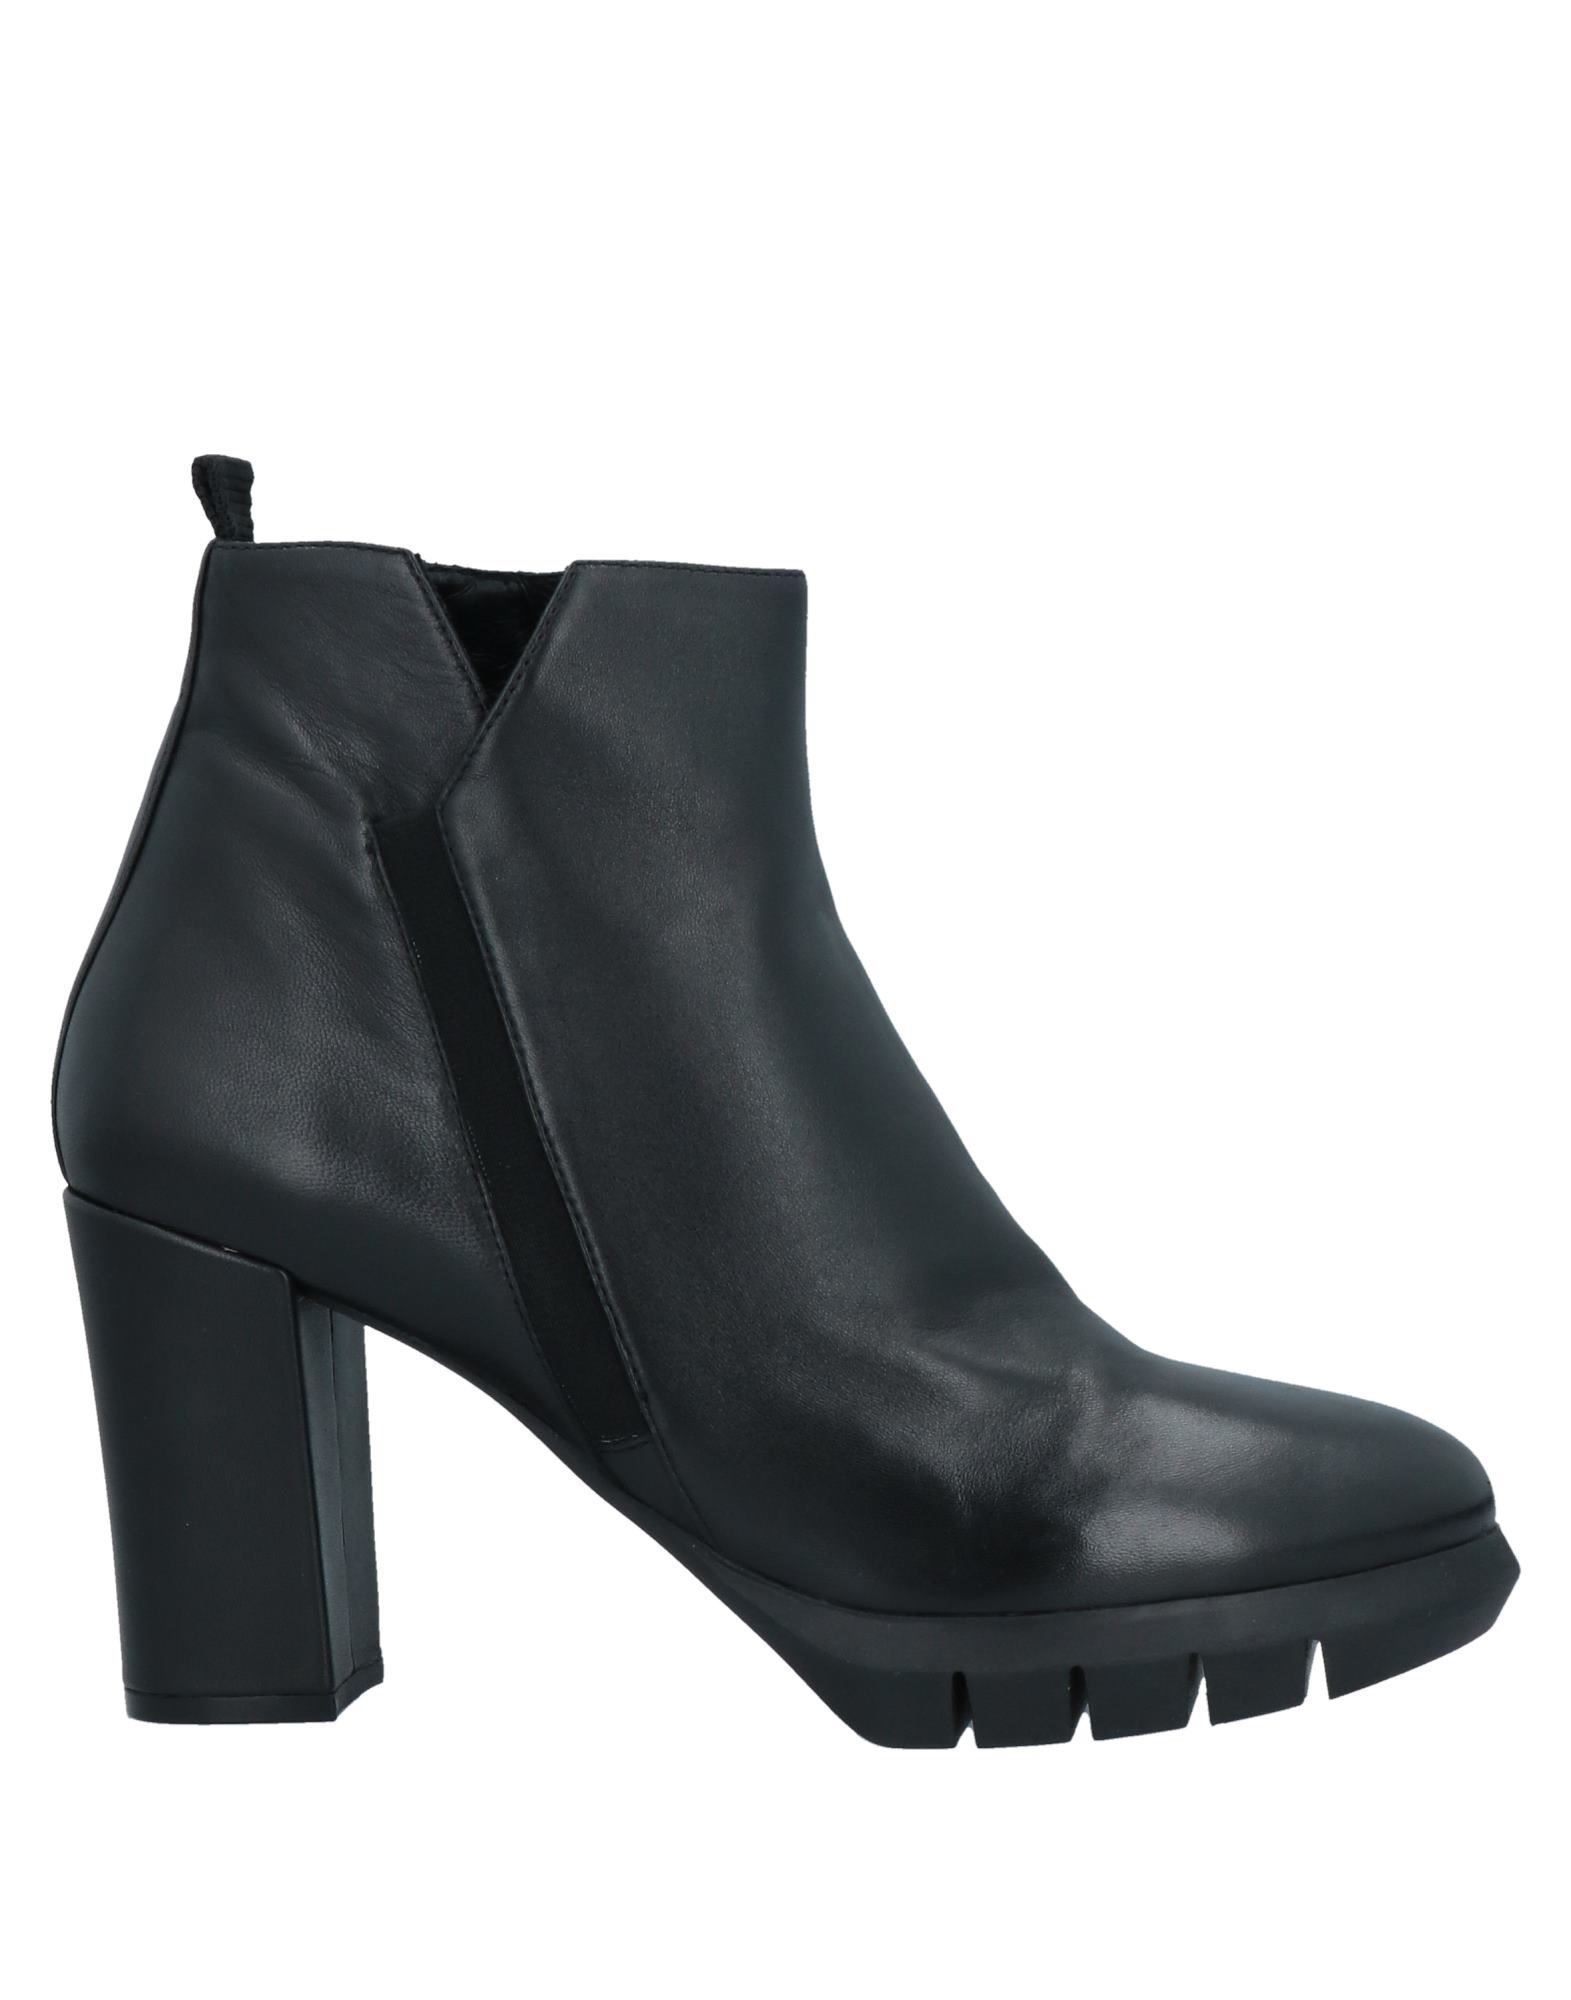 Adele Dezotti Ankle Boots In Black